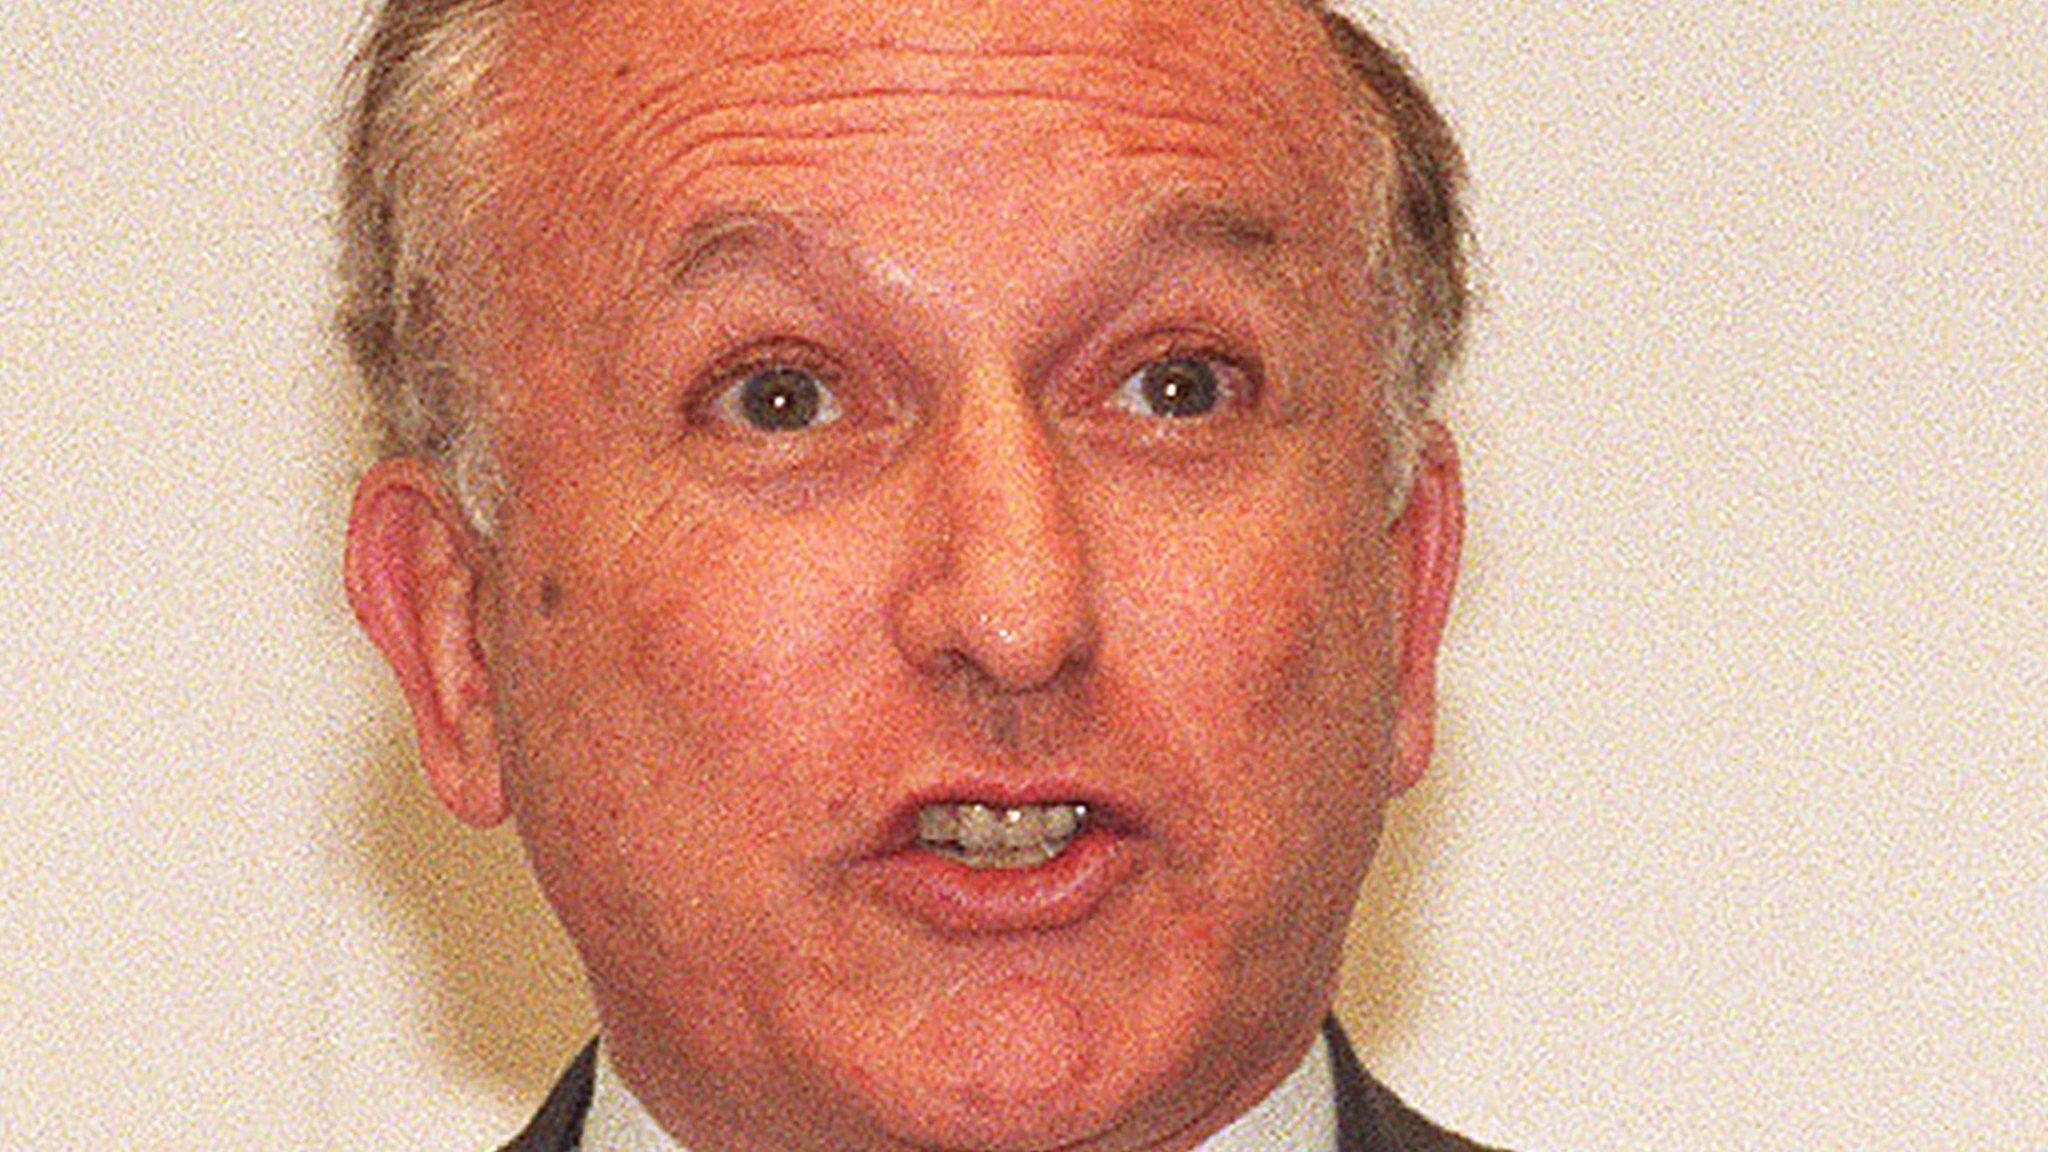 Lord Janner in 1996